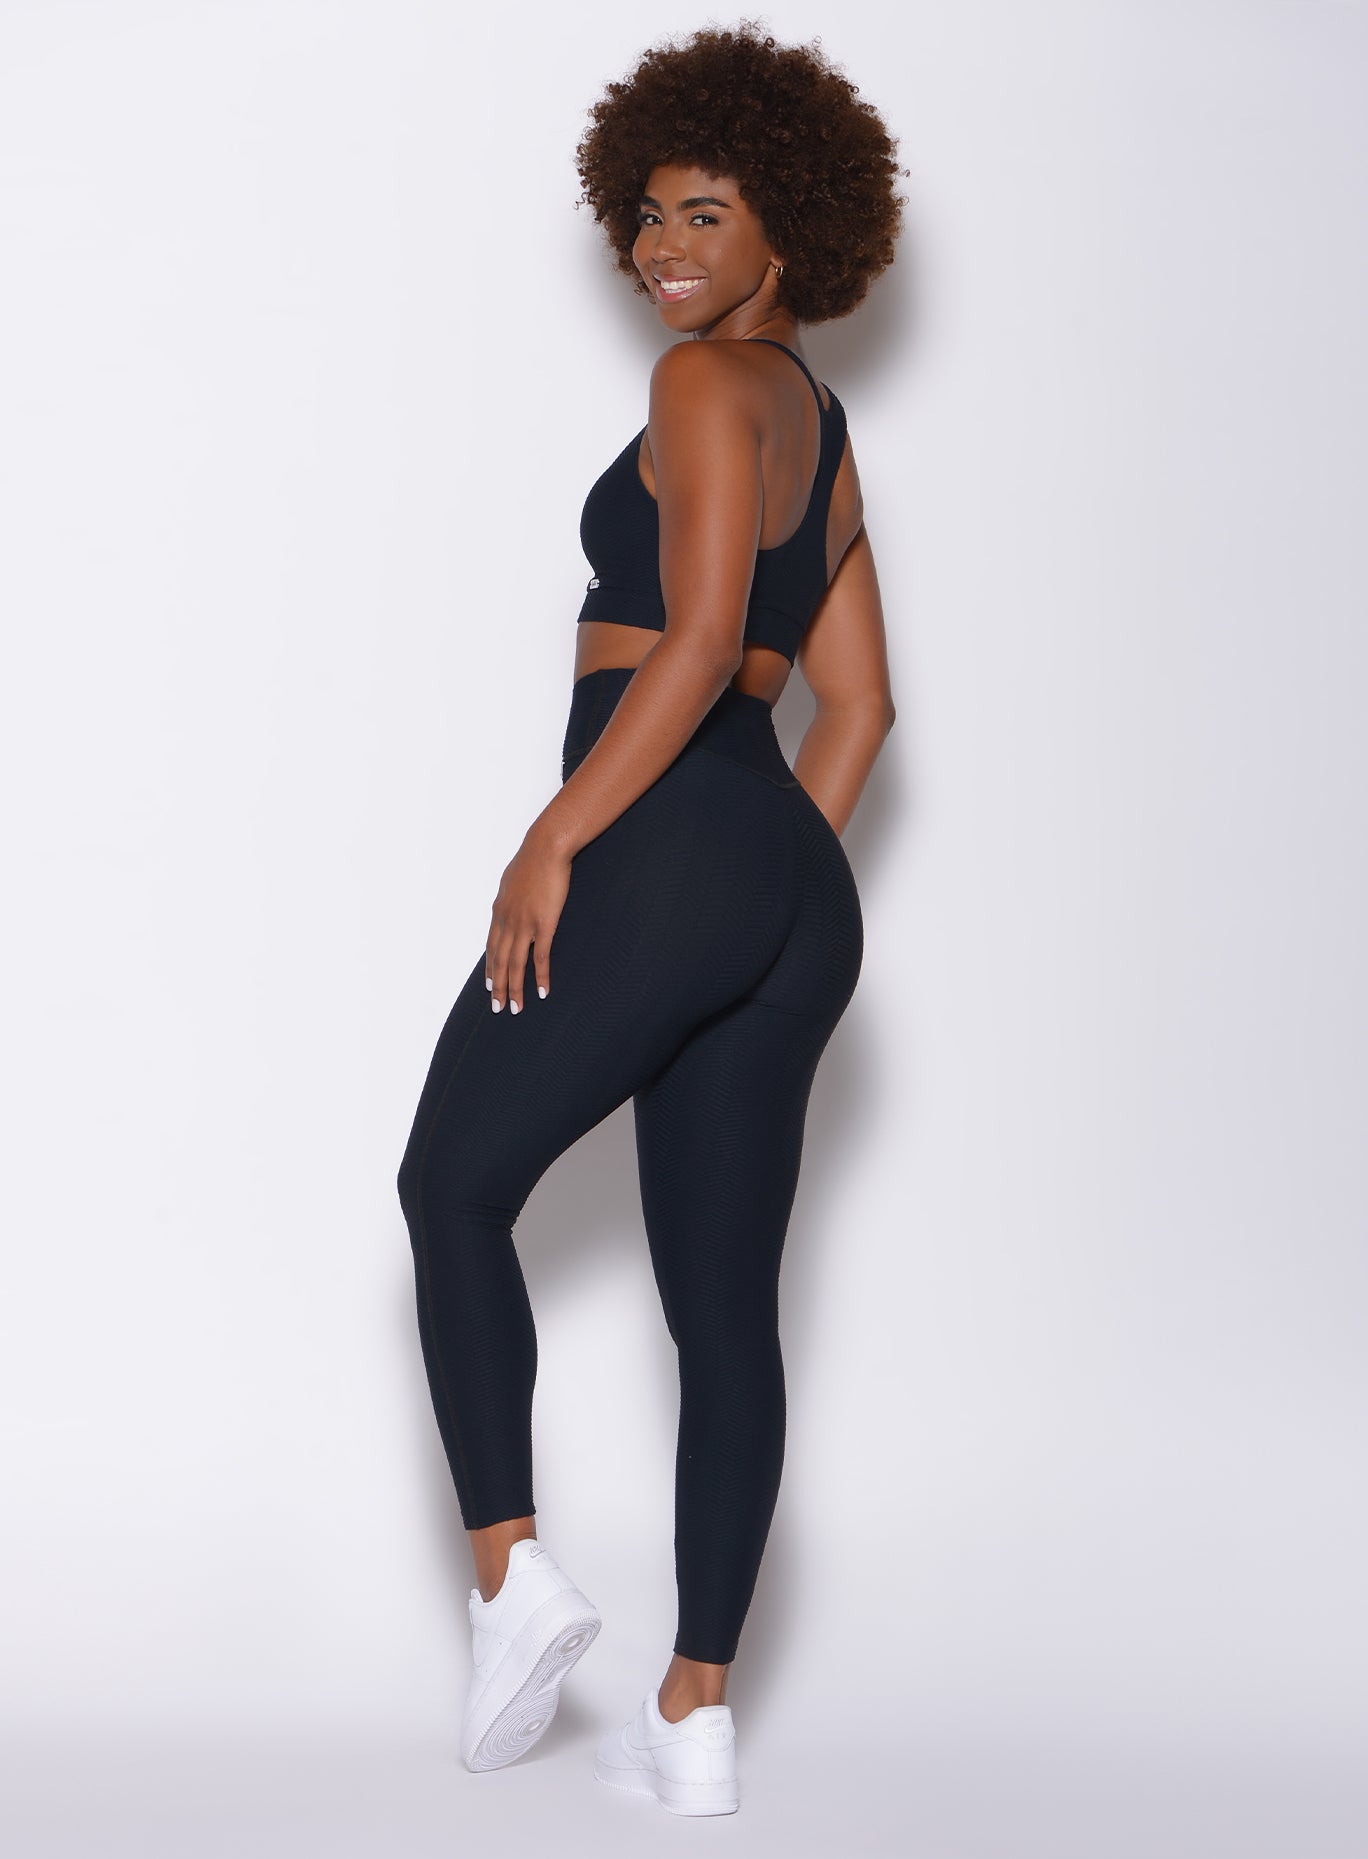 left side profile view of a model in our Chevron Leggings in jet black color and matching sports bra